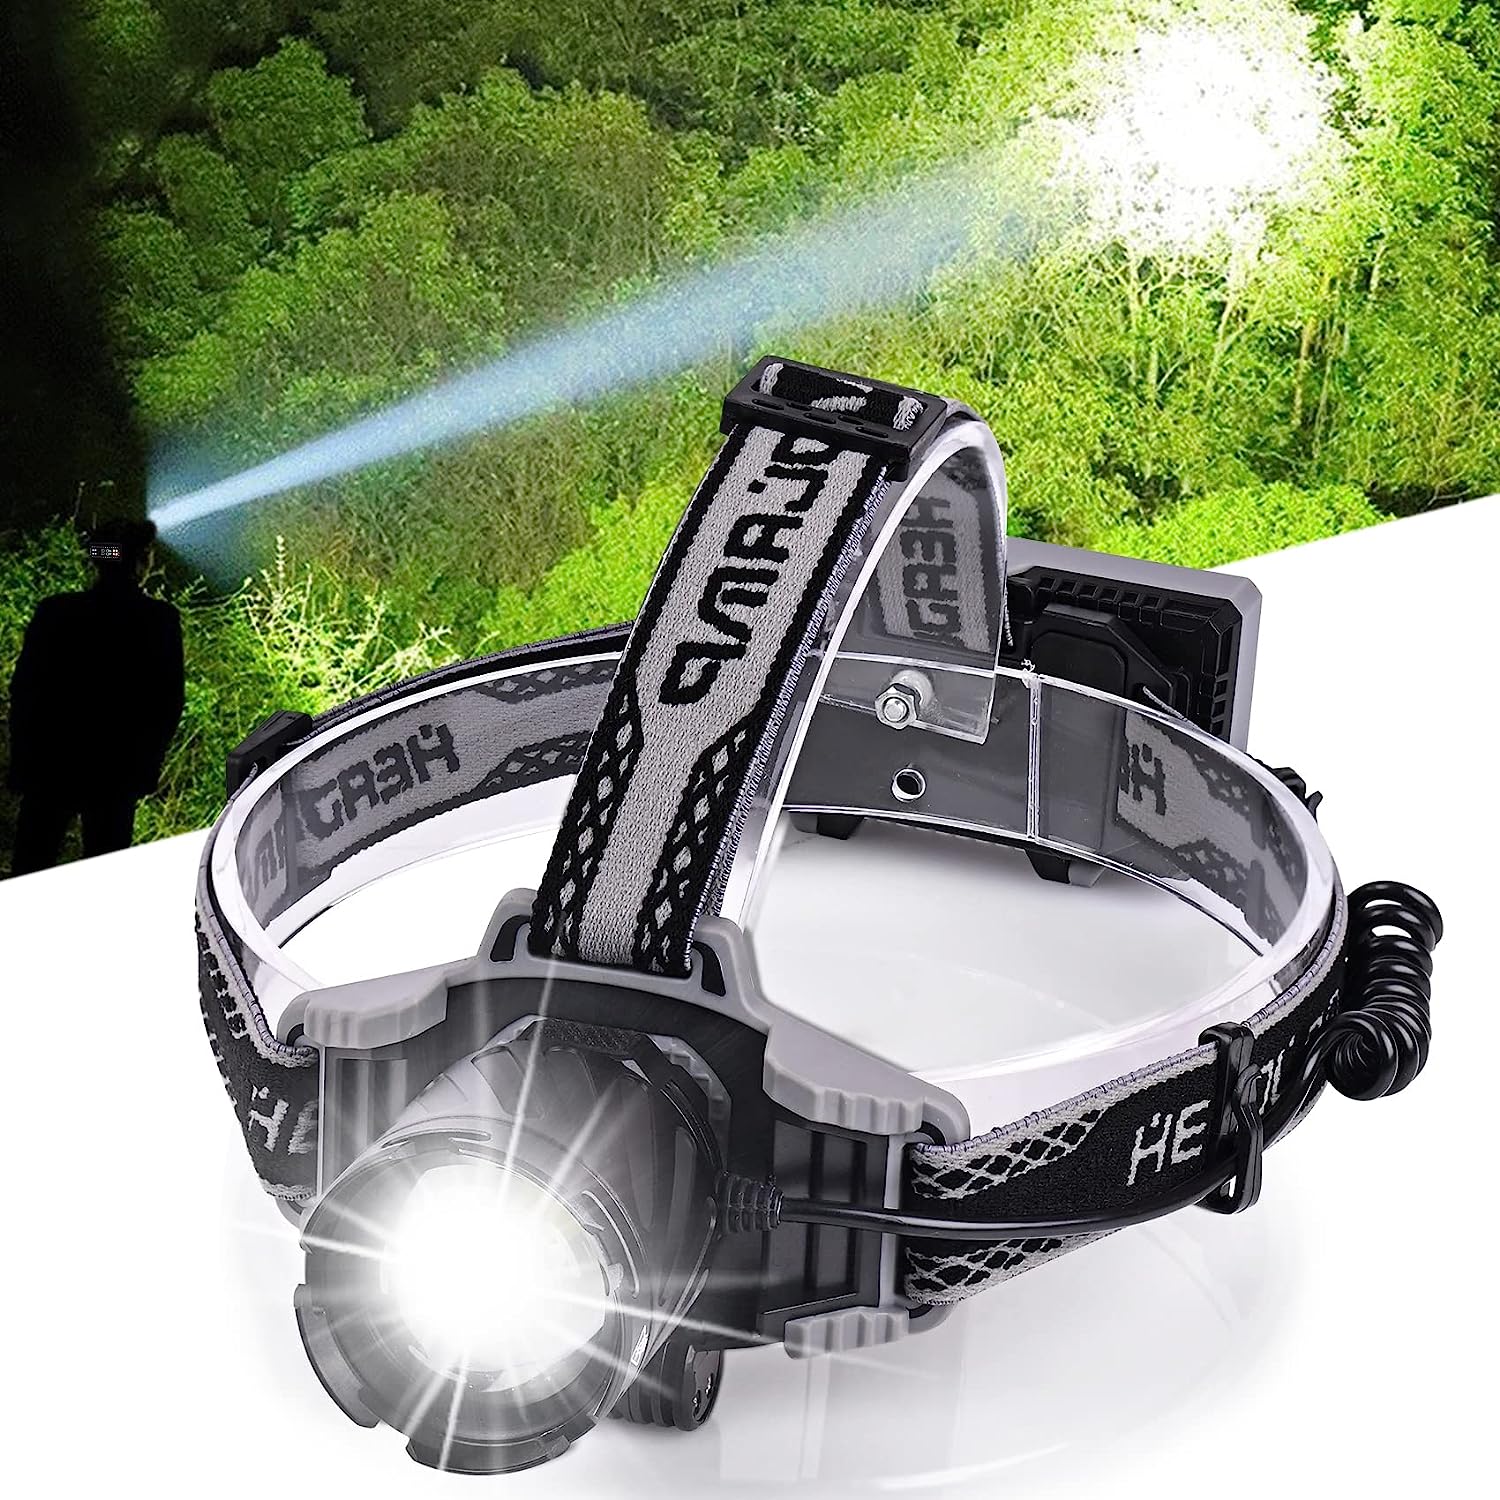 Rechargeable LED Headlamp, 100000 Lumens Super Bright [...]